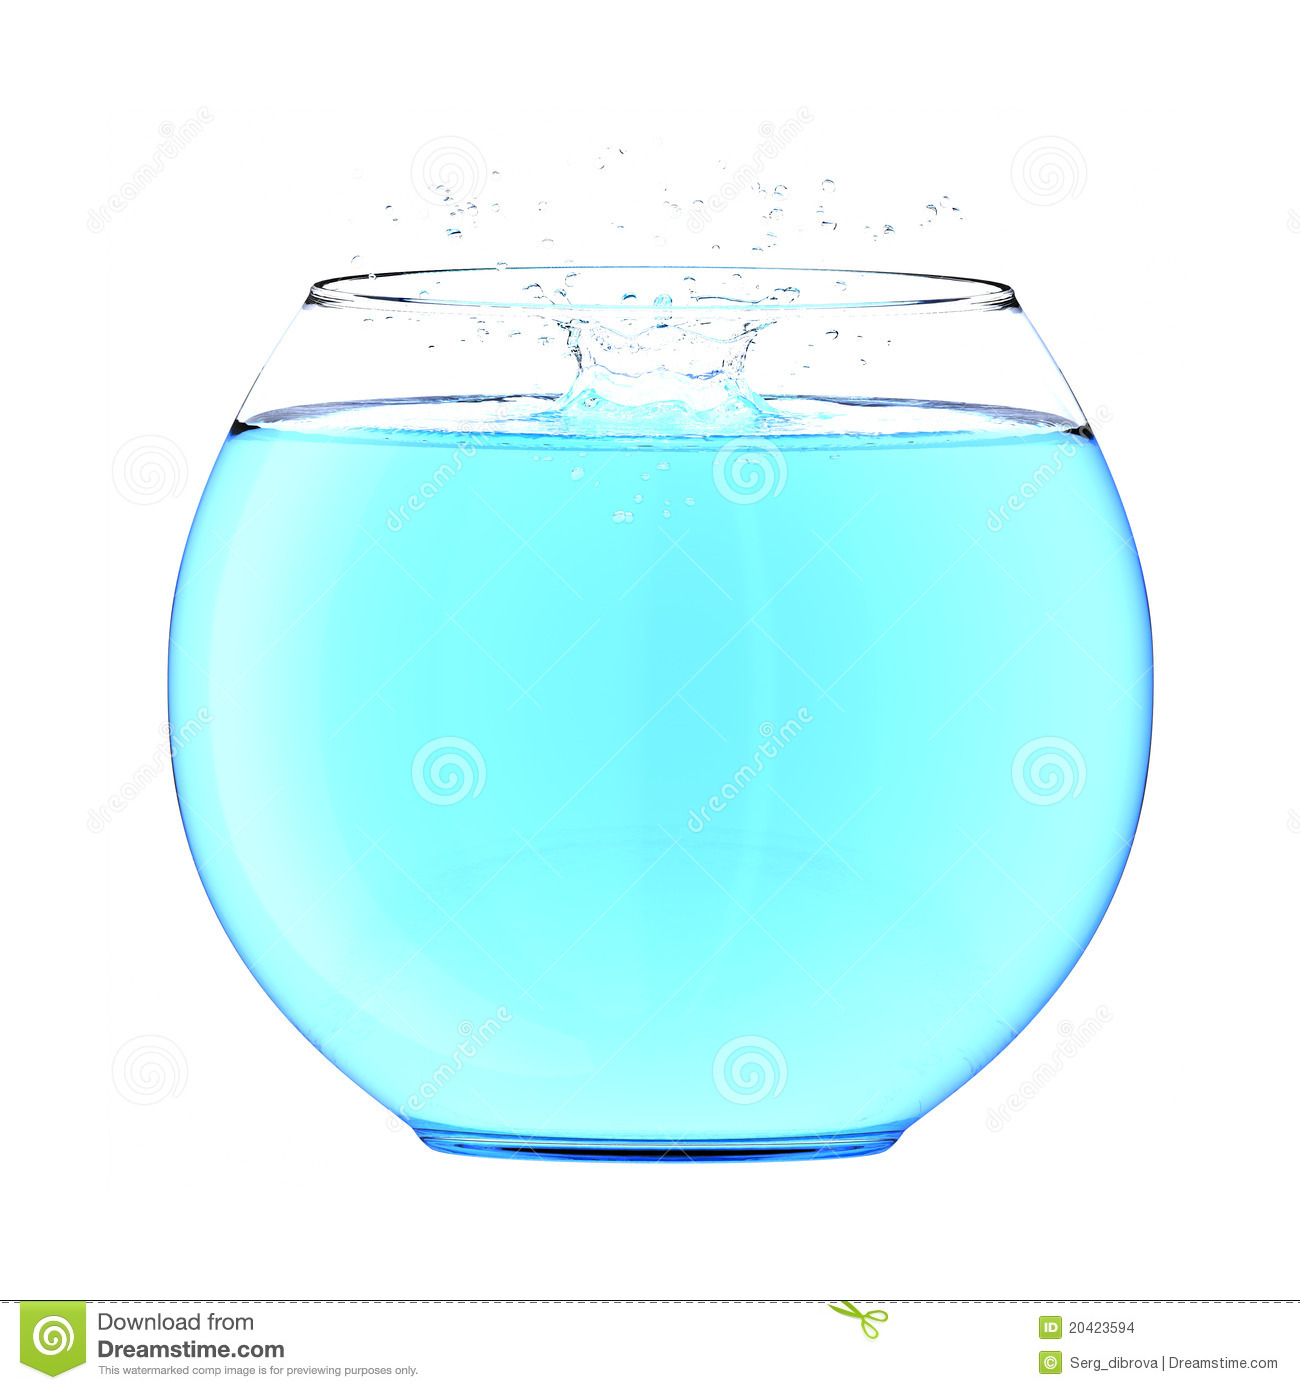 Water Splash In A Fishbowl Stock Images   Image  20423594